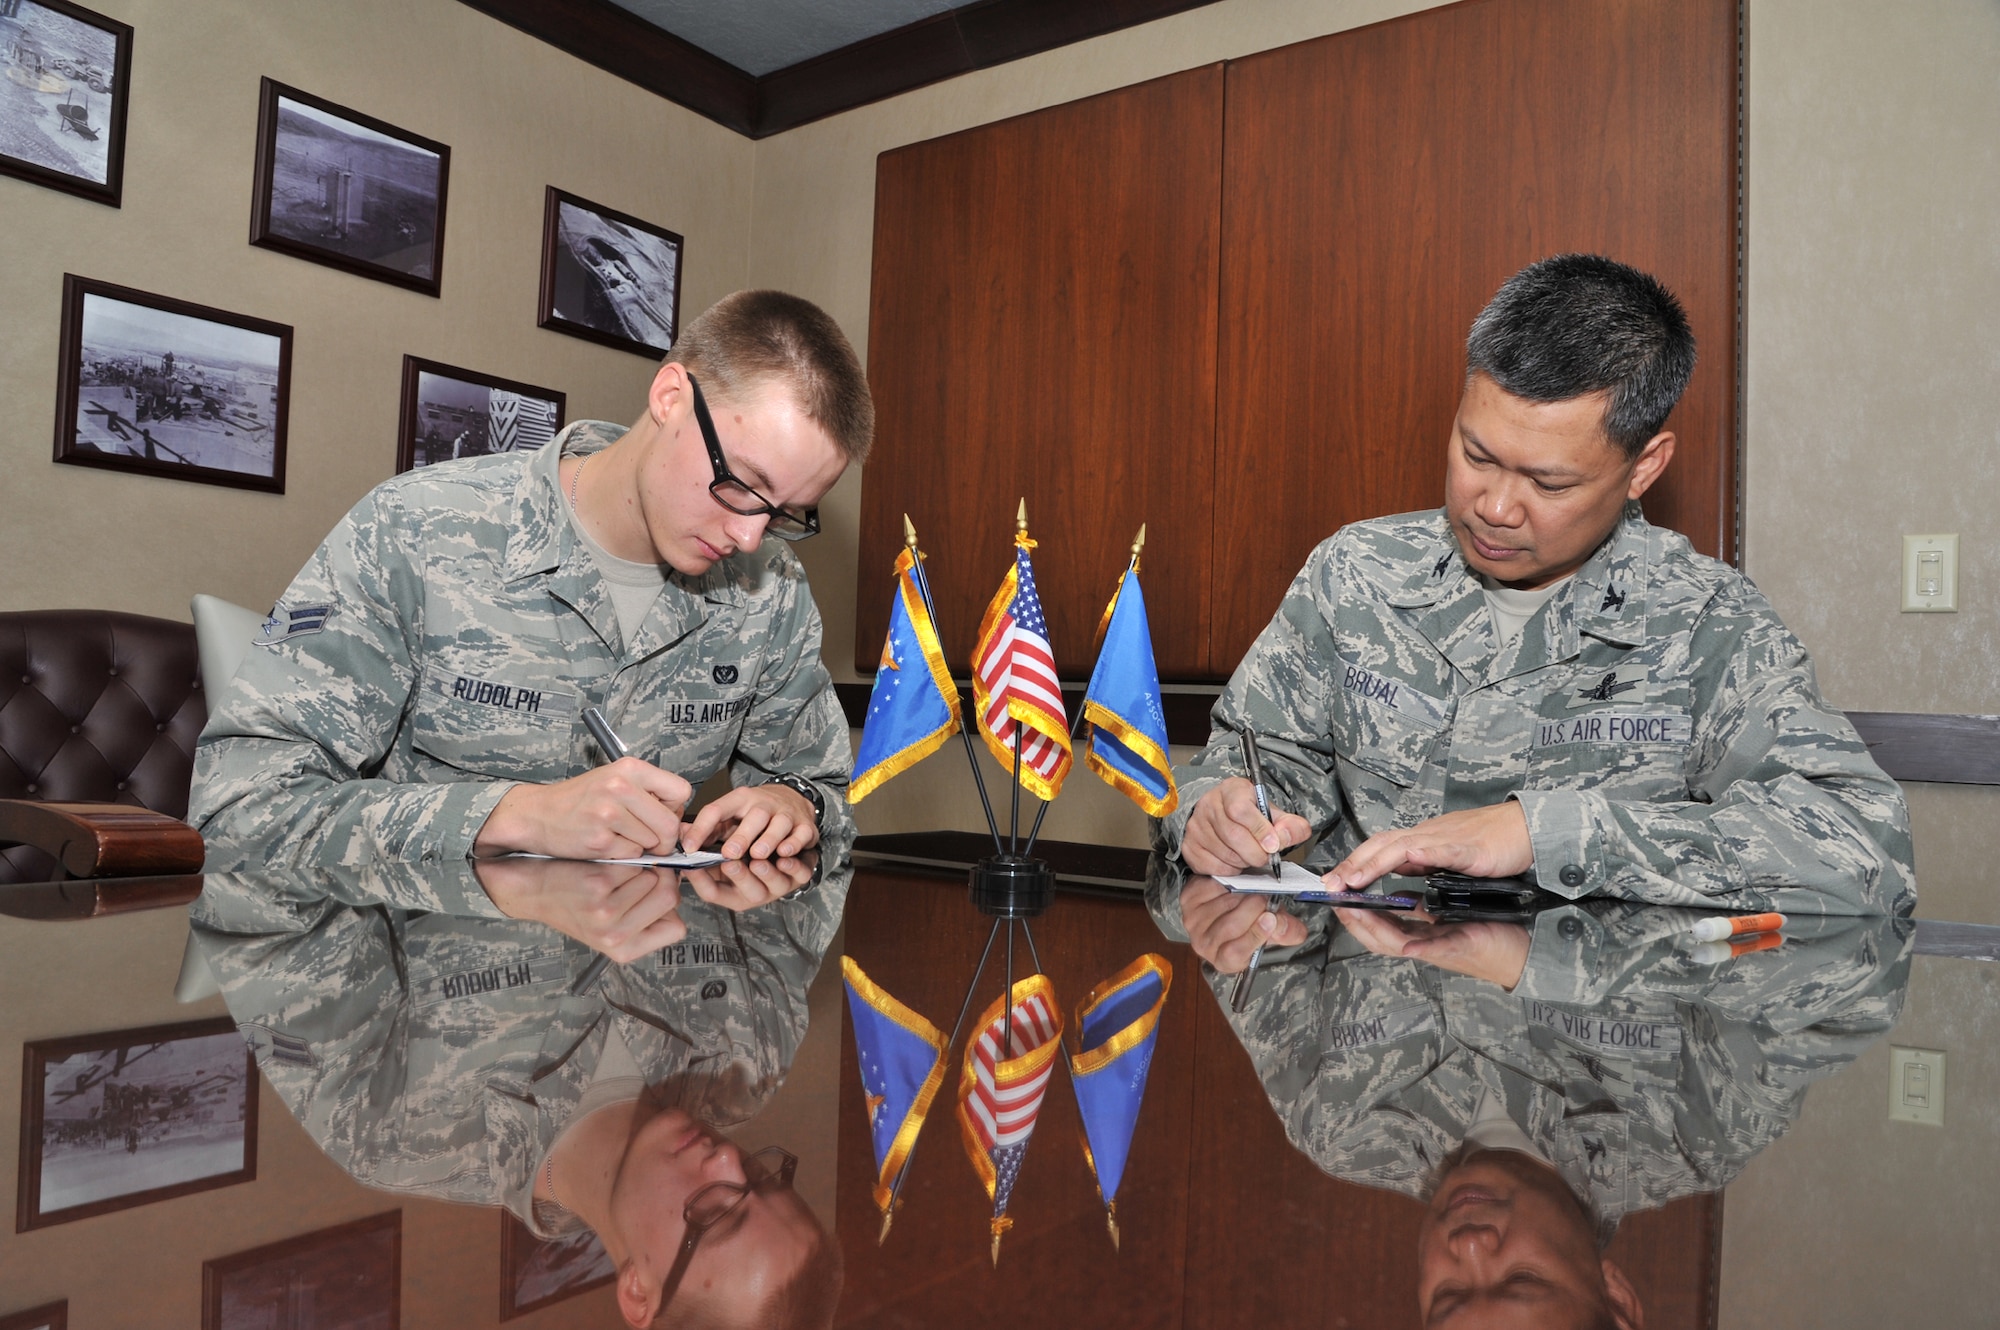 Airman 1st Class Rene Rudolph, 819th RED HORSE Squadron member, and Col. H.B. Brual, 341st Missile Wing commander, prepare to sign membership applications to join the Air Force Sergeants’ Association on June 7.  The AFSA’s next meeting is scheduled for June 29 at 11 a.m. at the Grizzly Bend.  (U.S. Air Force photo/ John Turner)